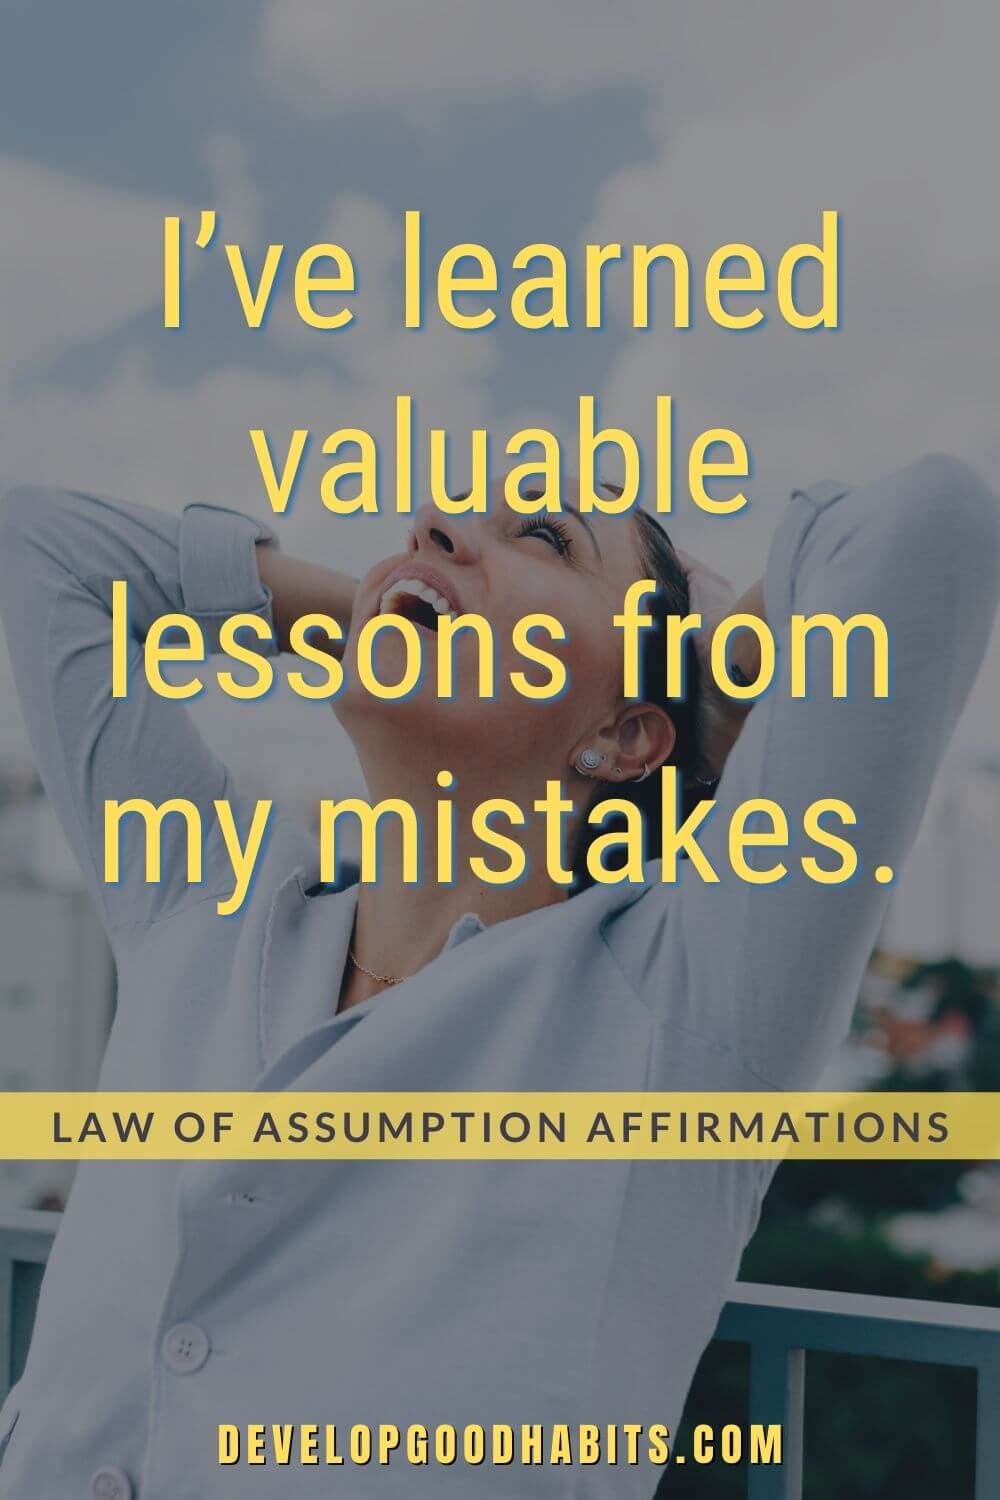 Law of Assumption Affirmations - I’ve learned valuable lessons from my mistakes. | law of assumption examples | law of assumption affirmations reddit | law of assumption relationship